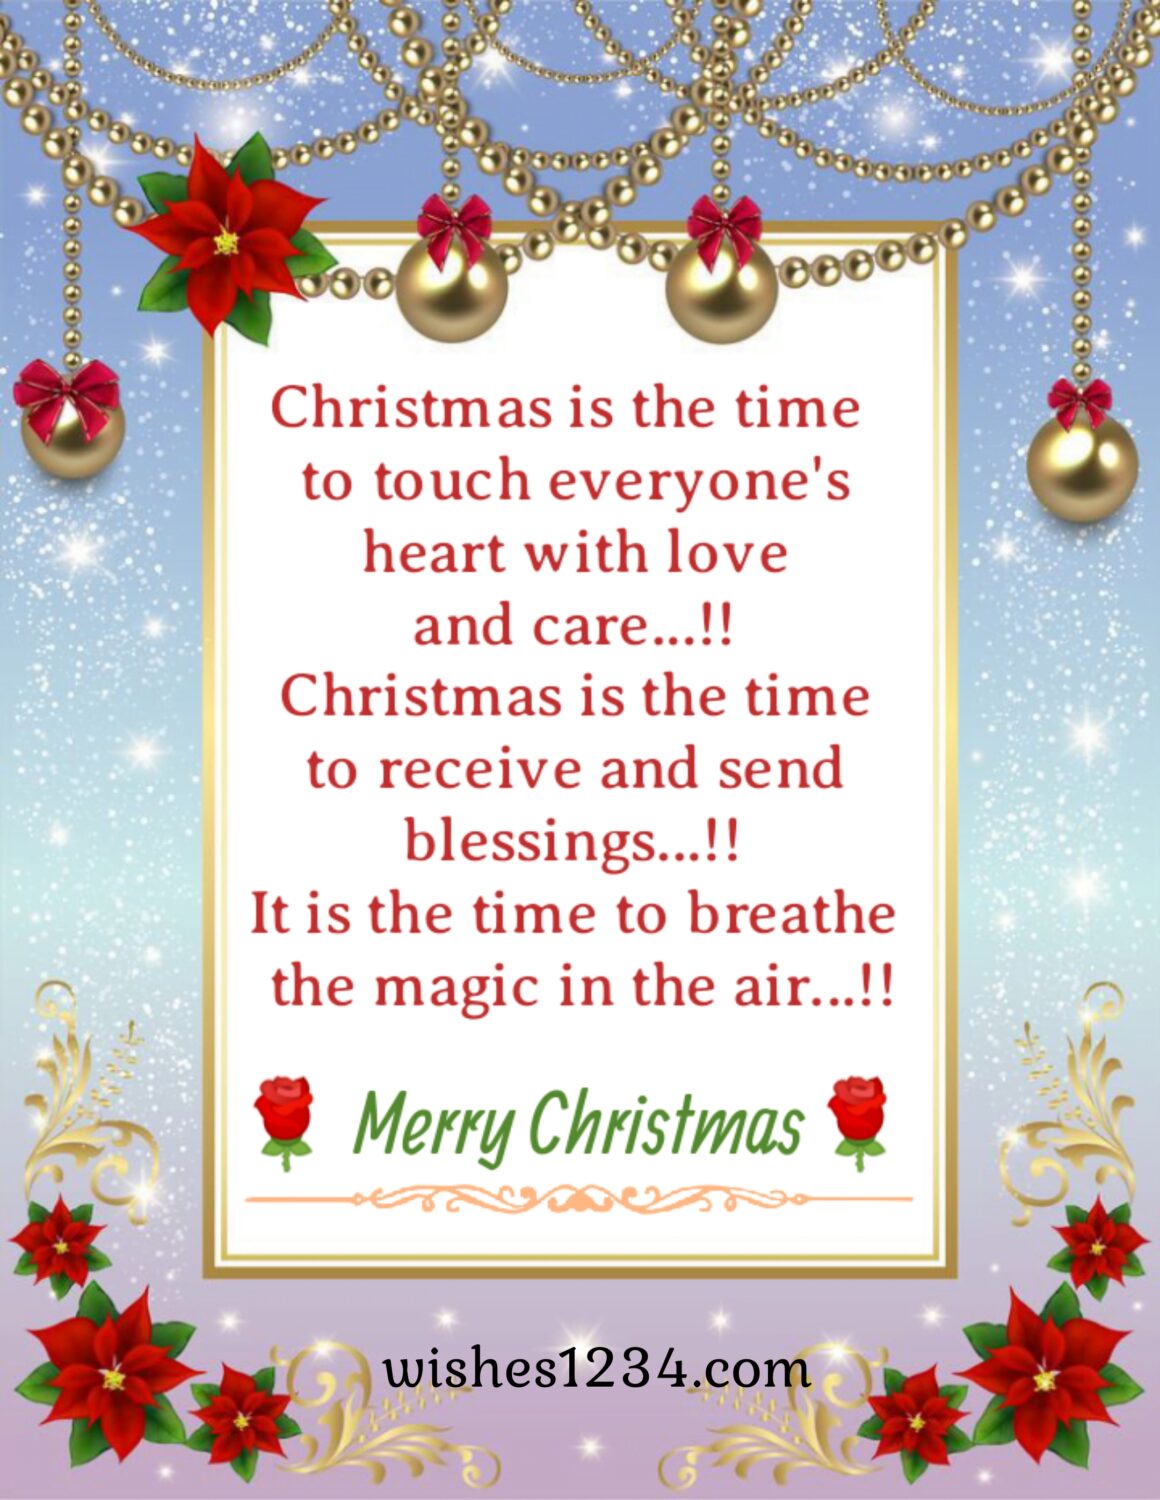 Christmas wishes on greeting card, Merry Christmas Quotes & short wishes.